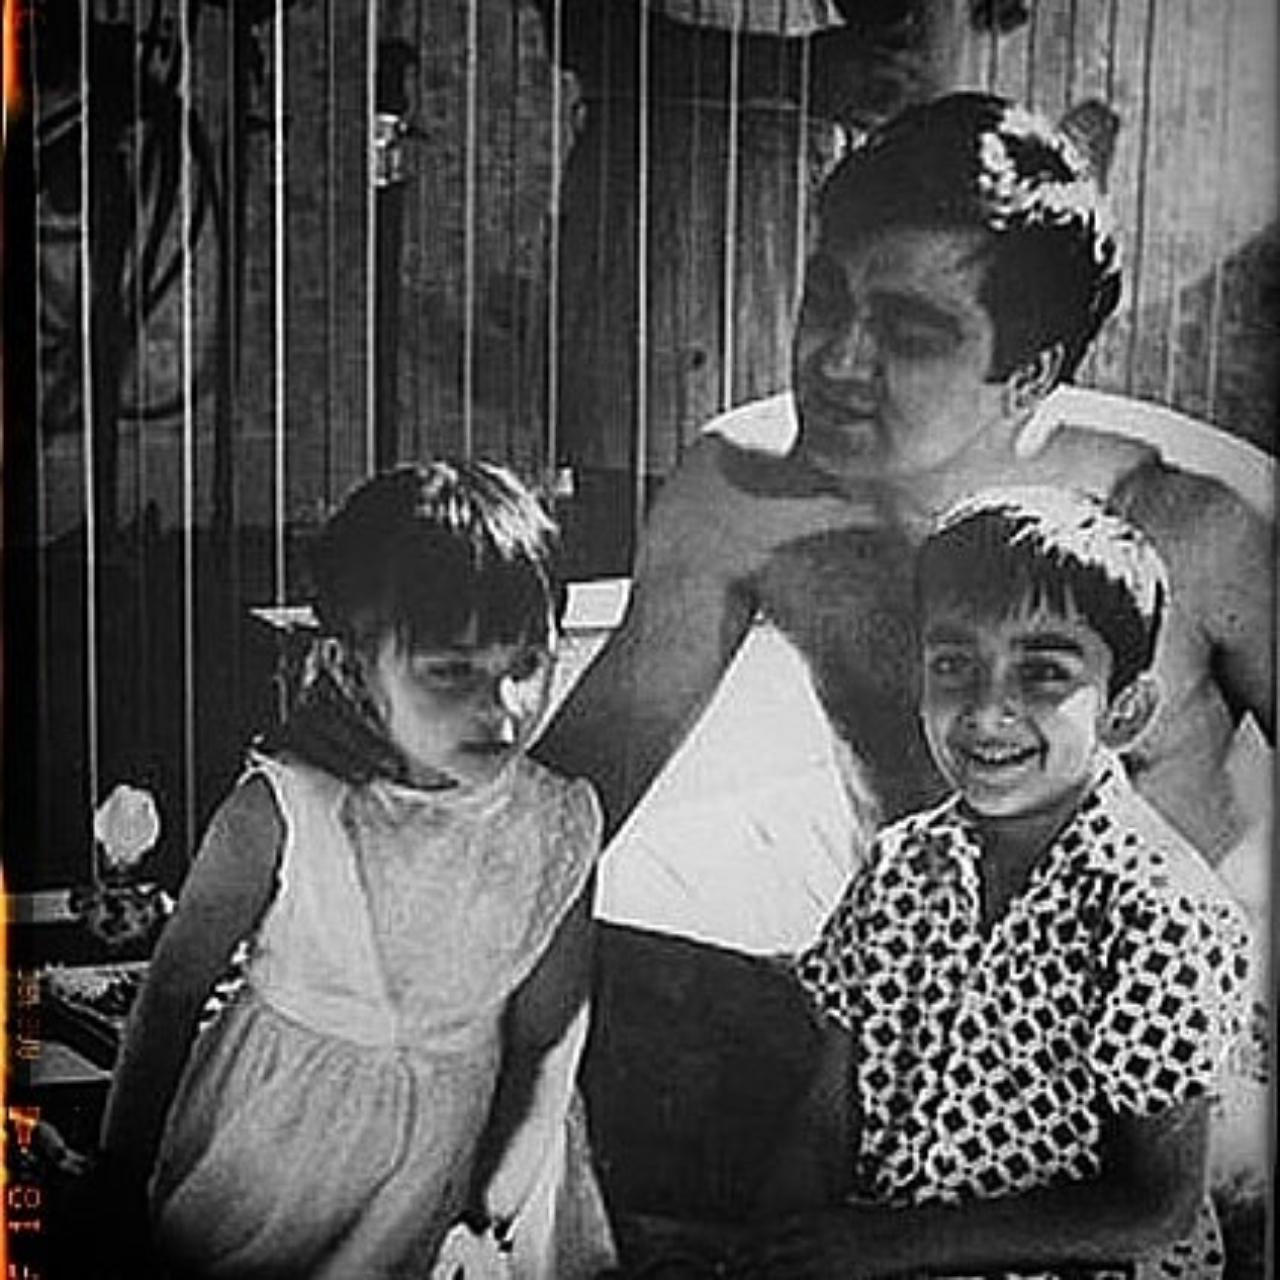 Sunil Dutt achieved stardom with the 1957 film Mother India, in which he starred opposite future wife Nargis. He played her short-tempered and angry son in the film, which also starred Rajendra Kumar. Interestingly, Dutt saved Nargis from a fire that broke out on sets during filming, after which he got romantically involved and married in 1958 